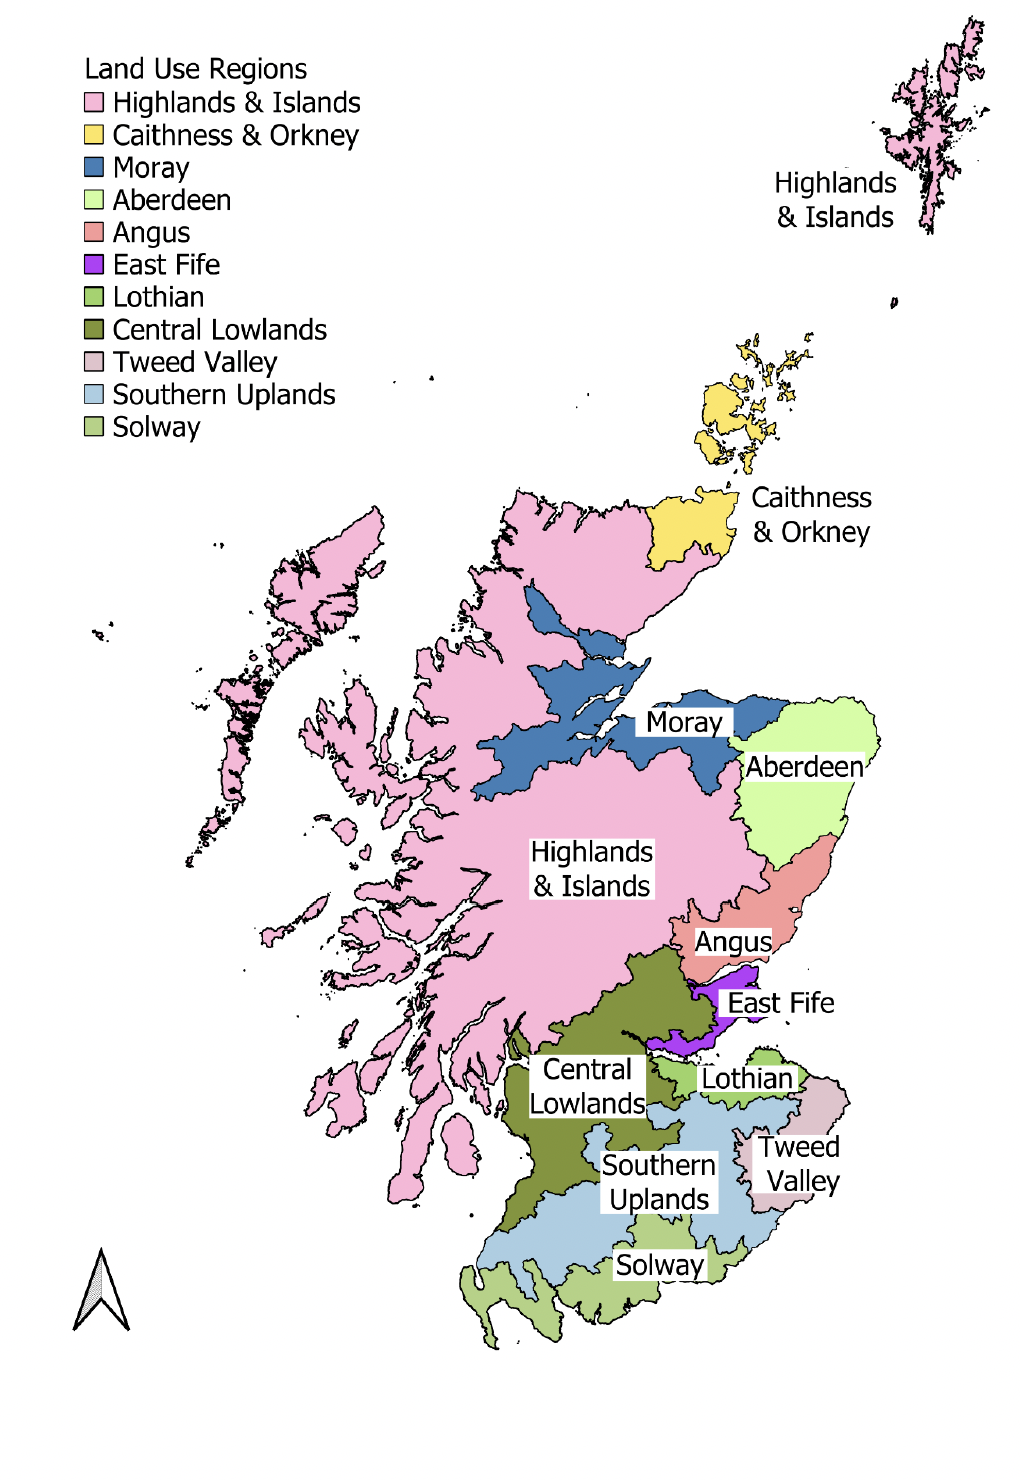 Map of Scotland showing locations of the eleven land use regions sampled: Map of Scotland showing locations of the eleven land use regions sampled: Highlands and Islands, Caithness and Orkney, Moray, Aberdeen, Angus, East Fife, Lothian, Central Lowlands, Tweed Valey, Southern Uplands and Solway.